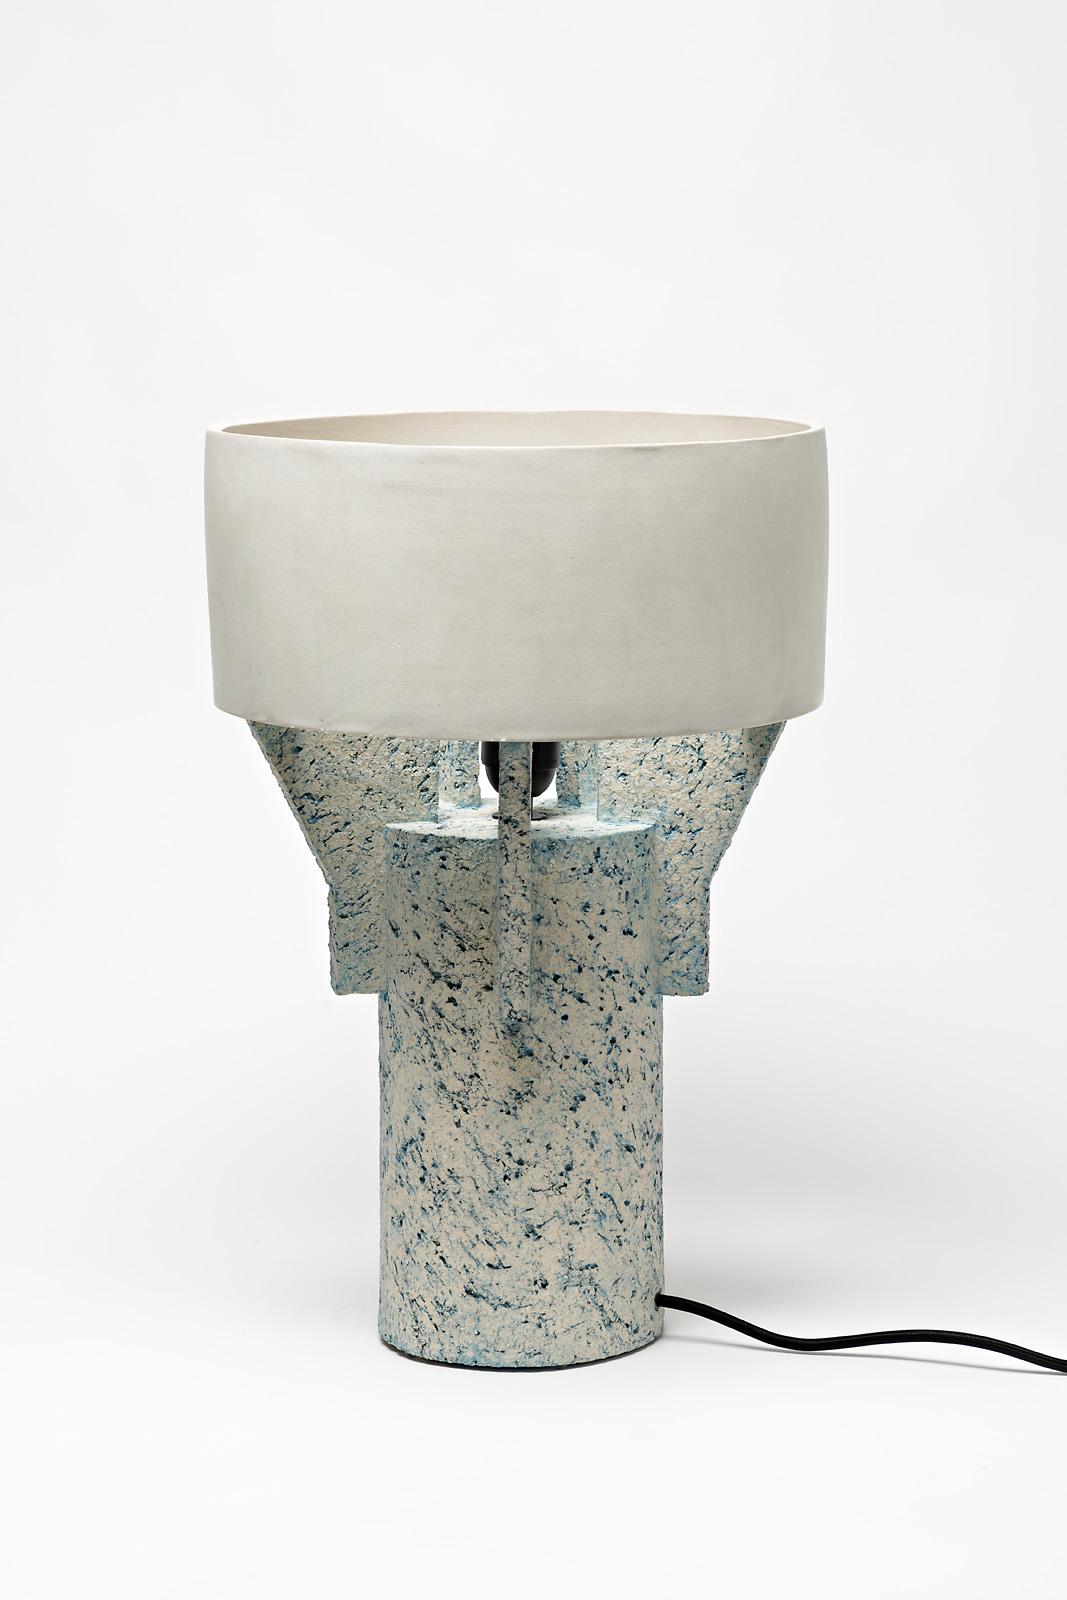 French Ceramic Table Lamp by Denis Castaing with White Glaze Decoration, 2019 For Sale